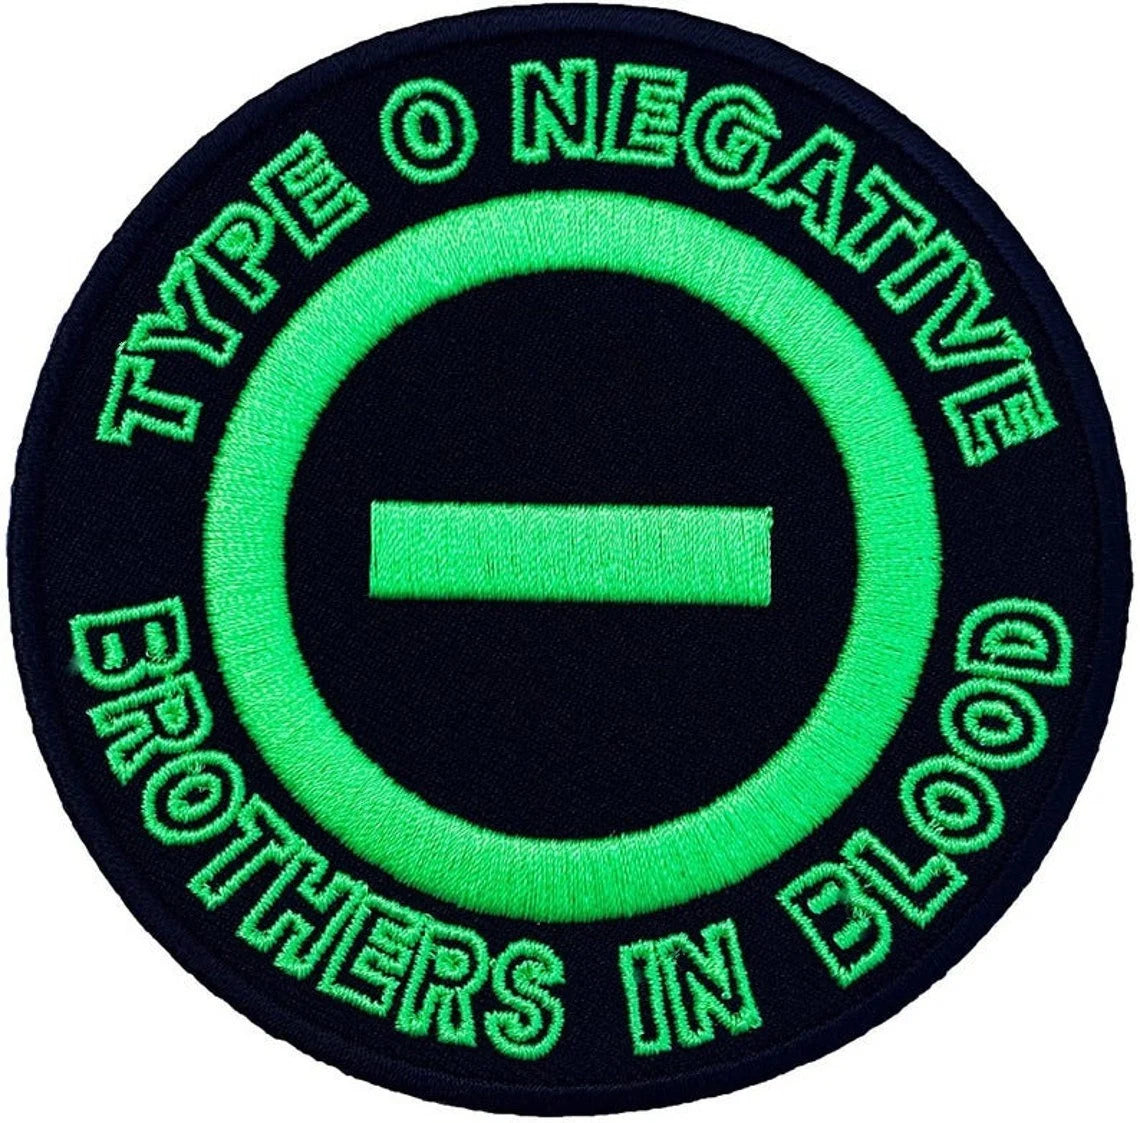 Type O Negative Patch (3 Inch) Iron or Sew-on Badge Brothers in Blood Metal Music Patches